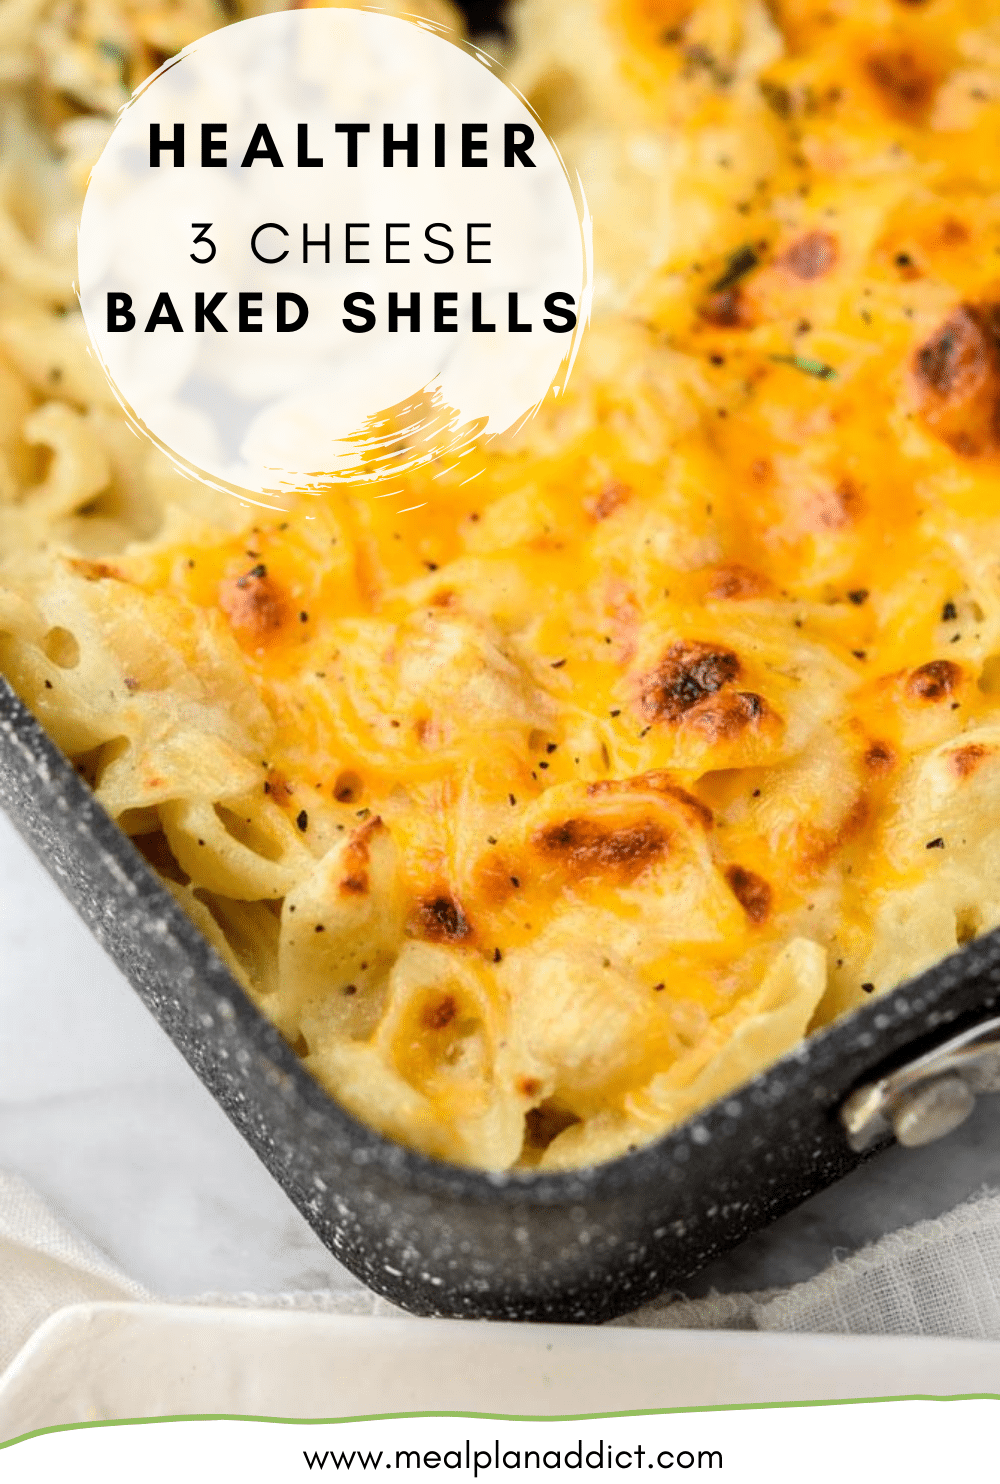 Healthier 3 Cheese Baked Shells